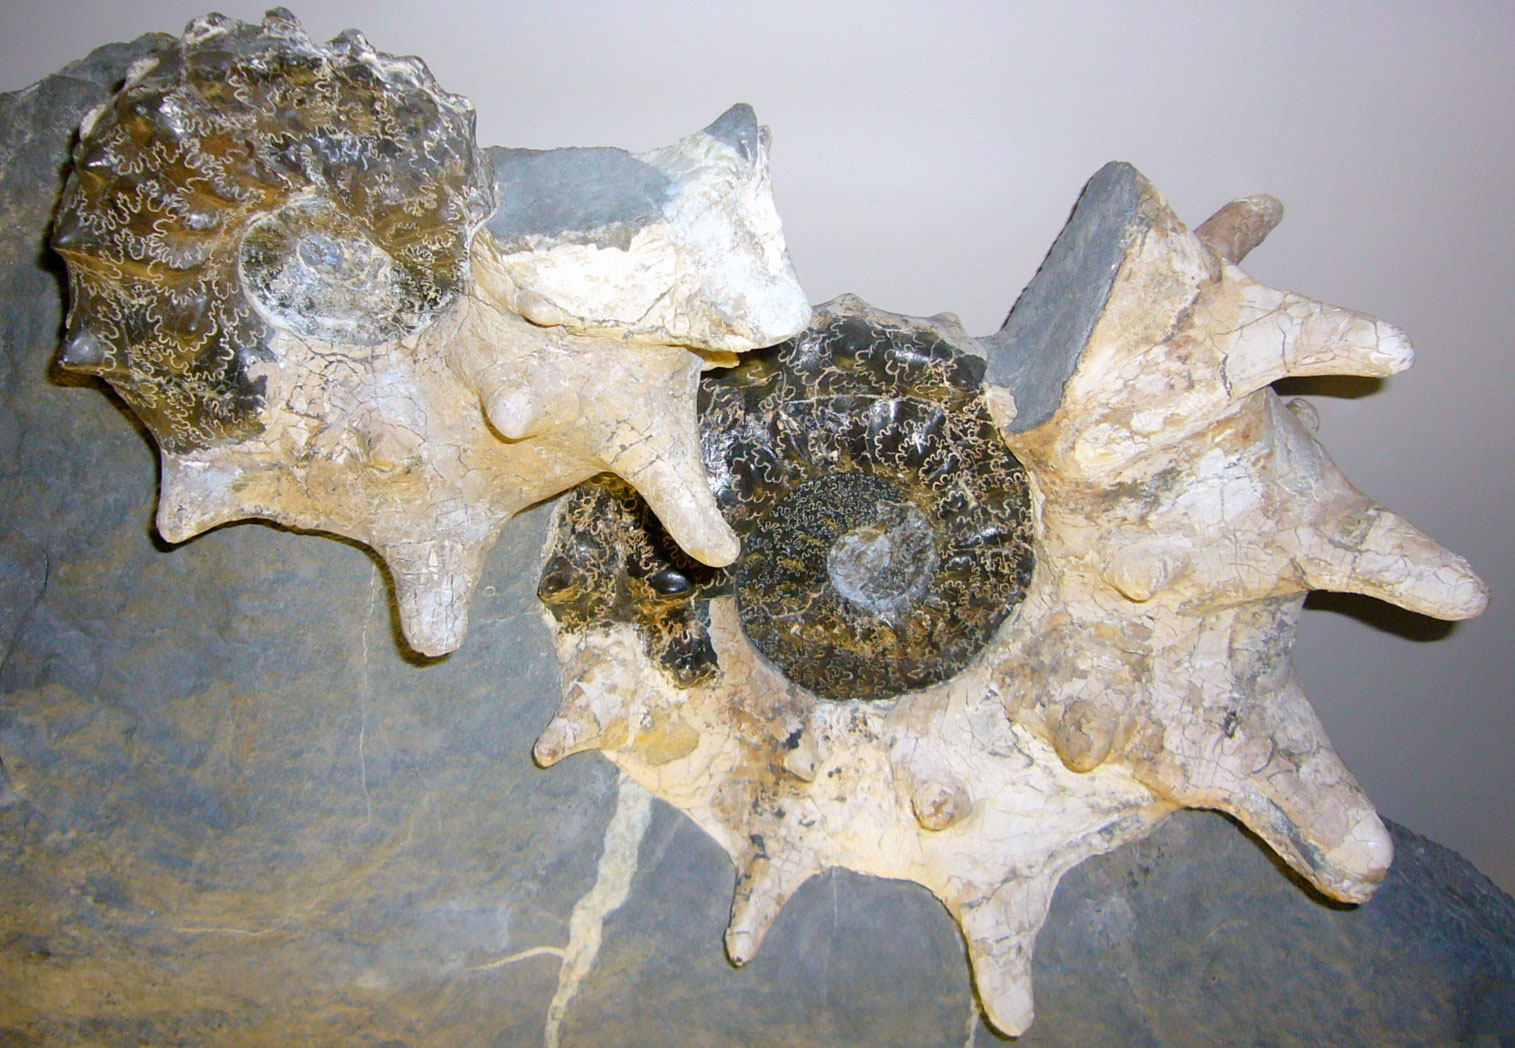 Photograph of two shells of the ammonoid Plesiacanthoceras wyomingense from the Cretaceous Cody Shale of Wyoming. The photo shows two shells, each spiraling in a single plane. The shells have large, think spines. The first whorls of each shell are brown and shiny with clear ammonoid sutures. The later whorls are dull beige to off-white, and the sutures cannot be seen.